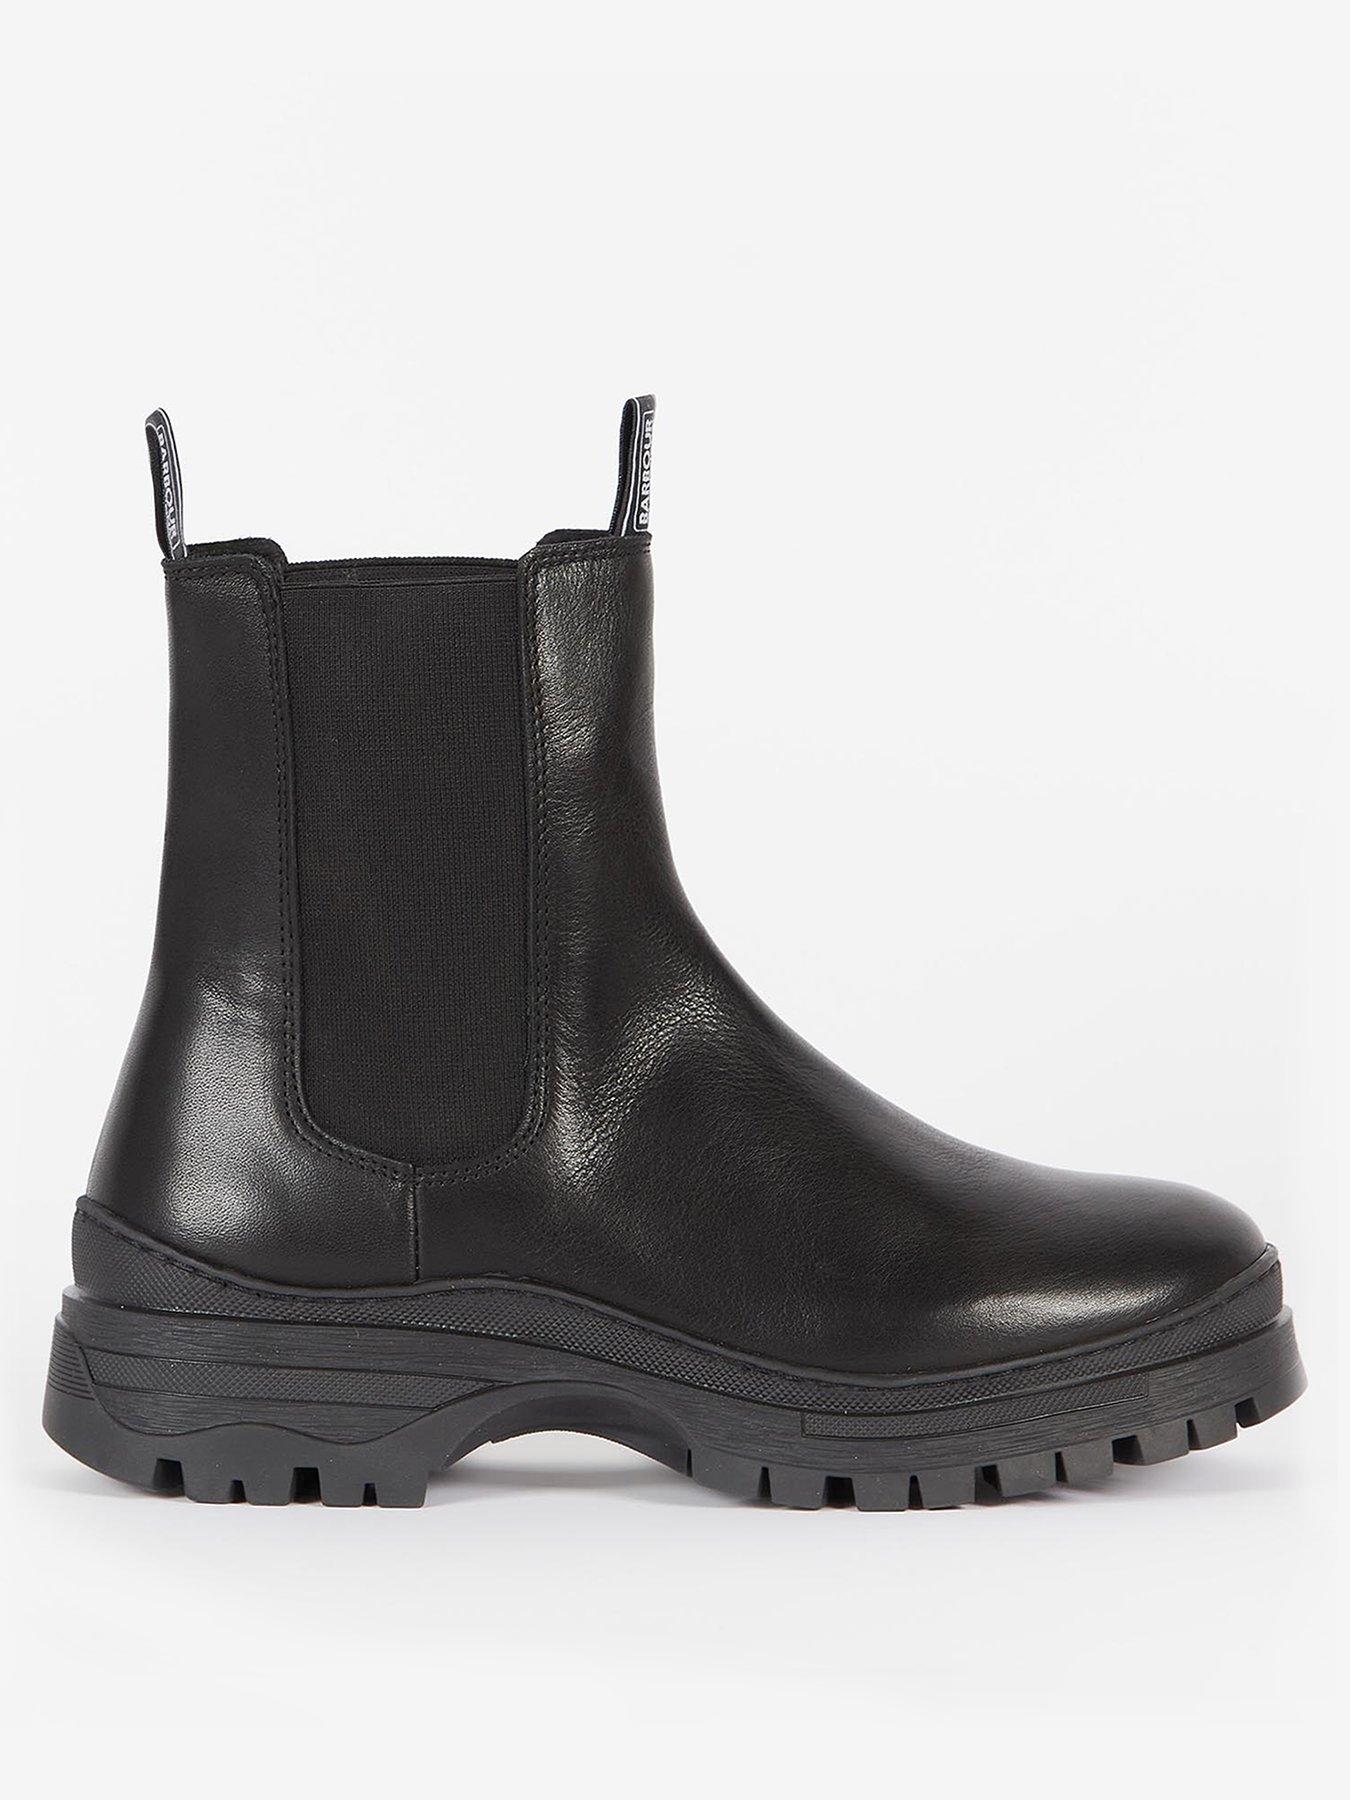 Shoes & boots Copello Leather Chunky Chelsea Boot - Black